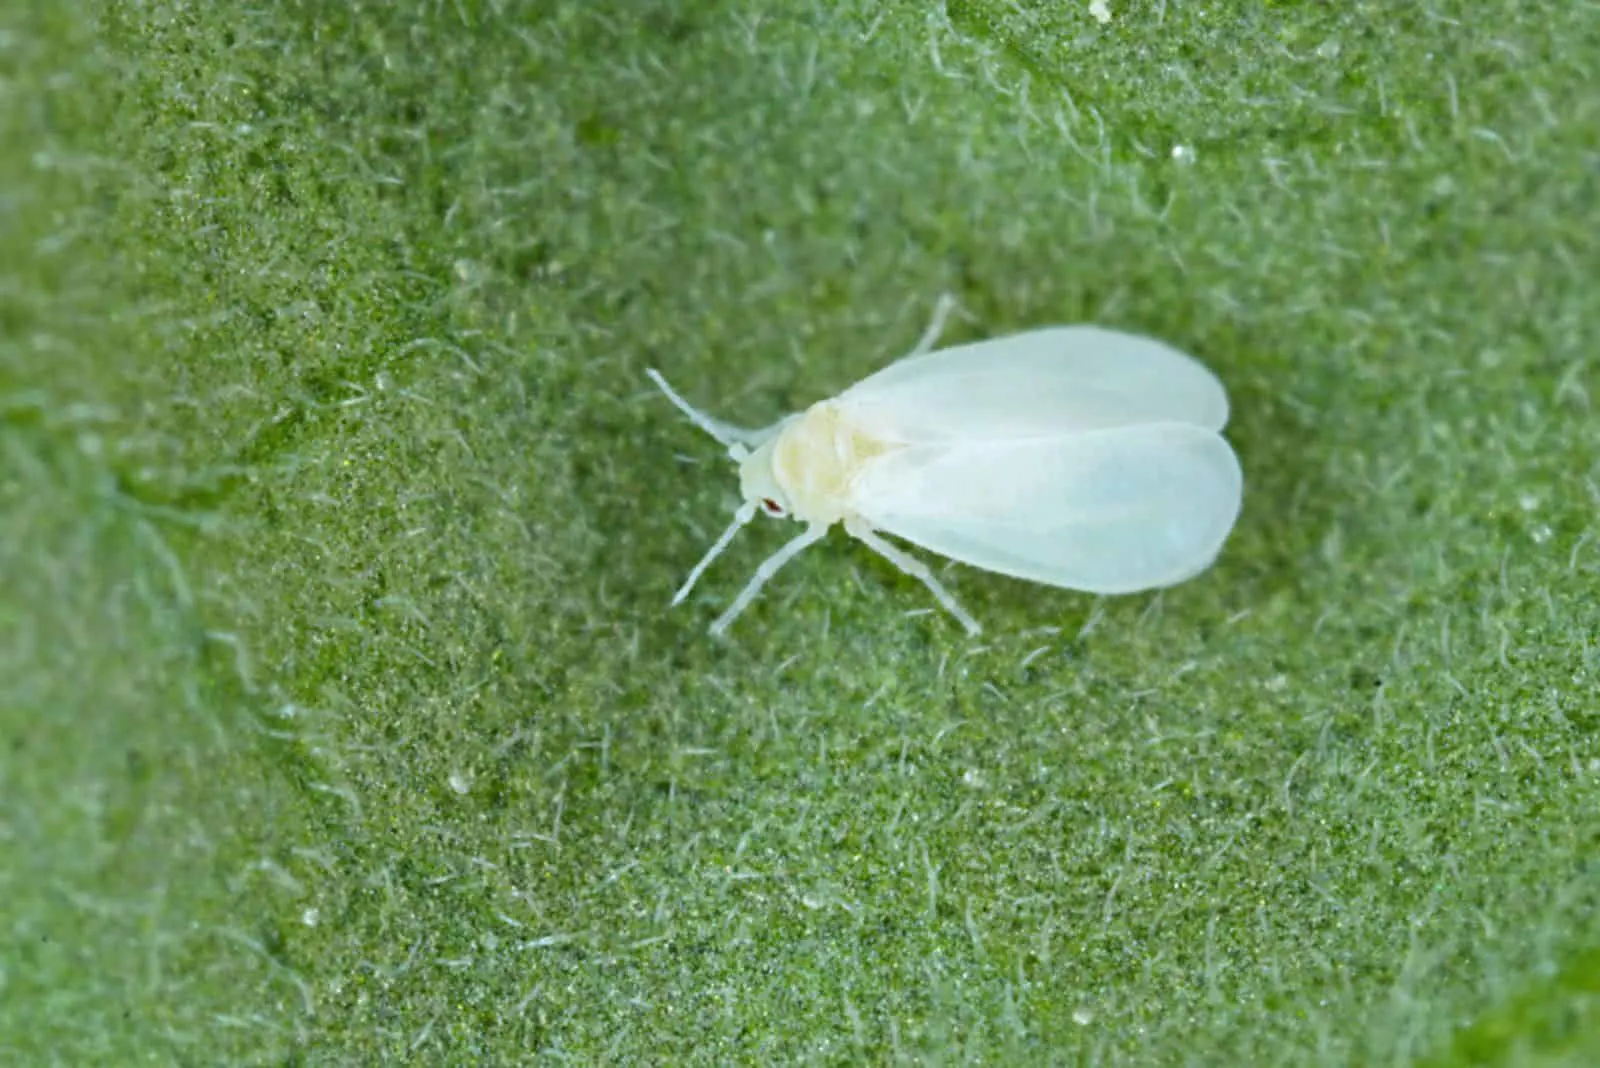 The glasshouse whitefly or greenhouse whitefly 